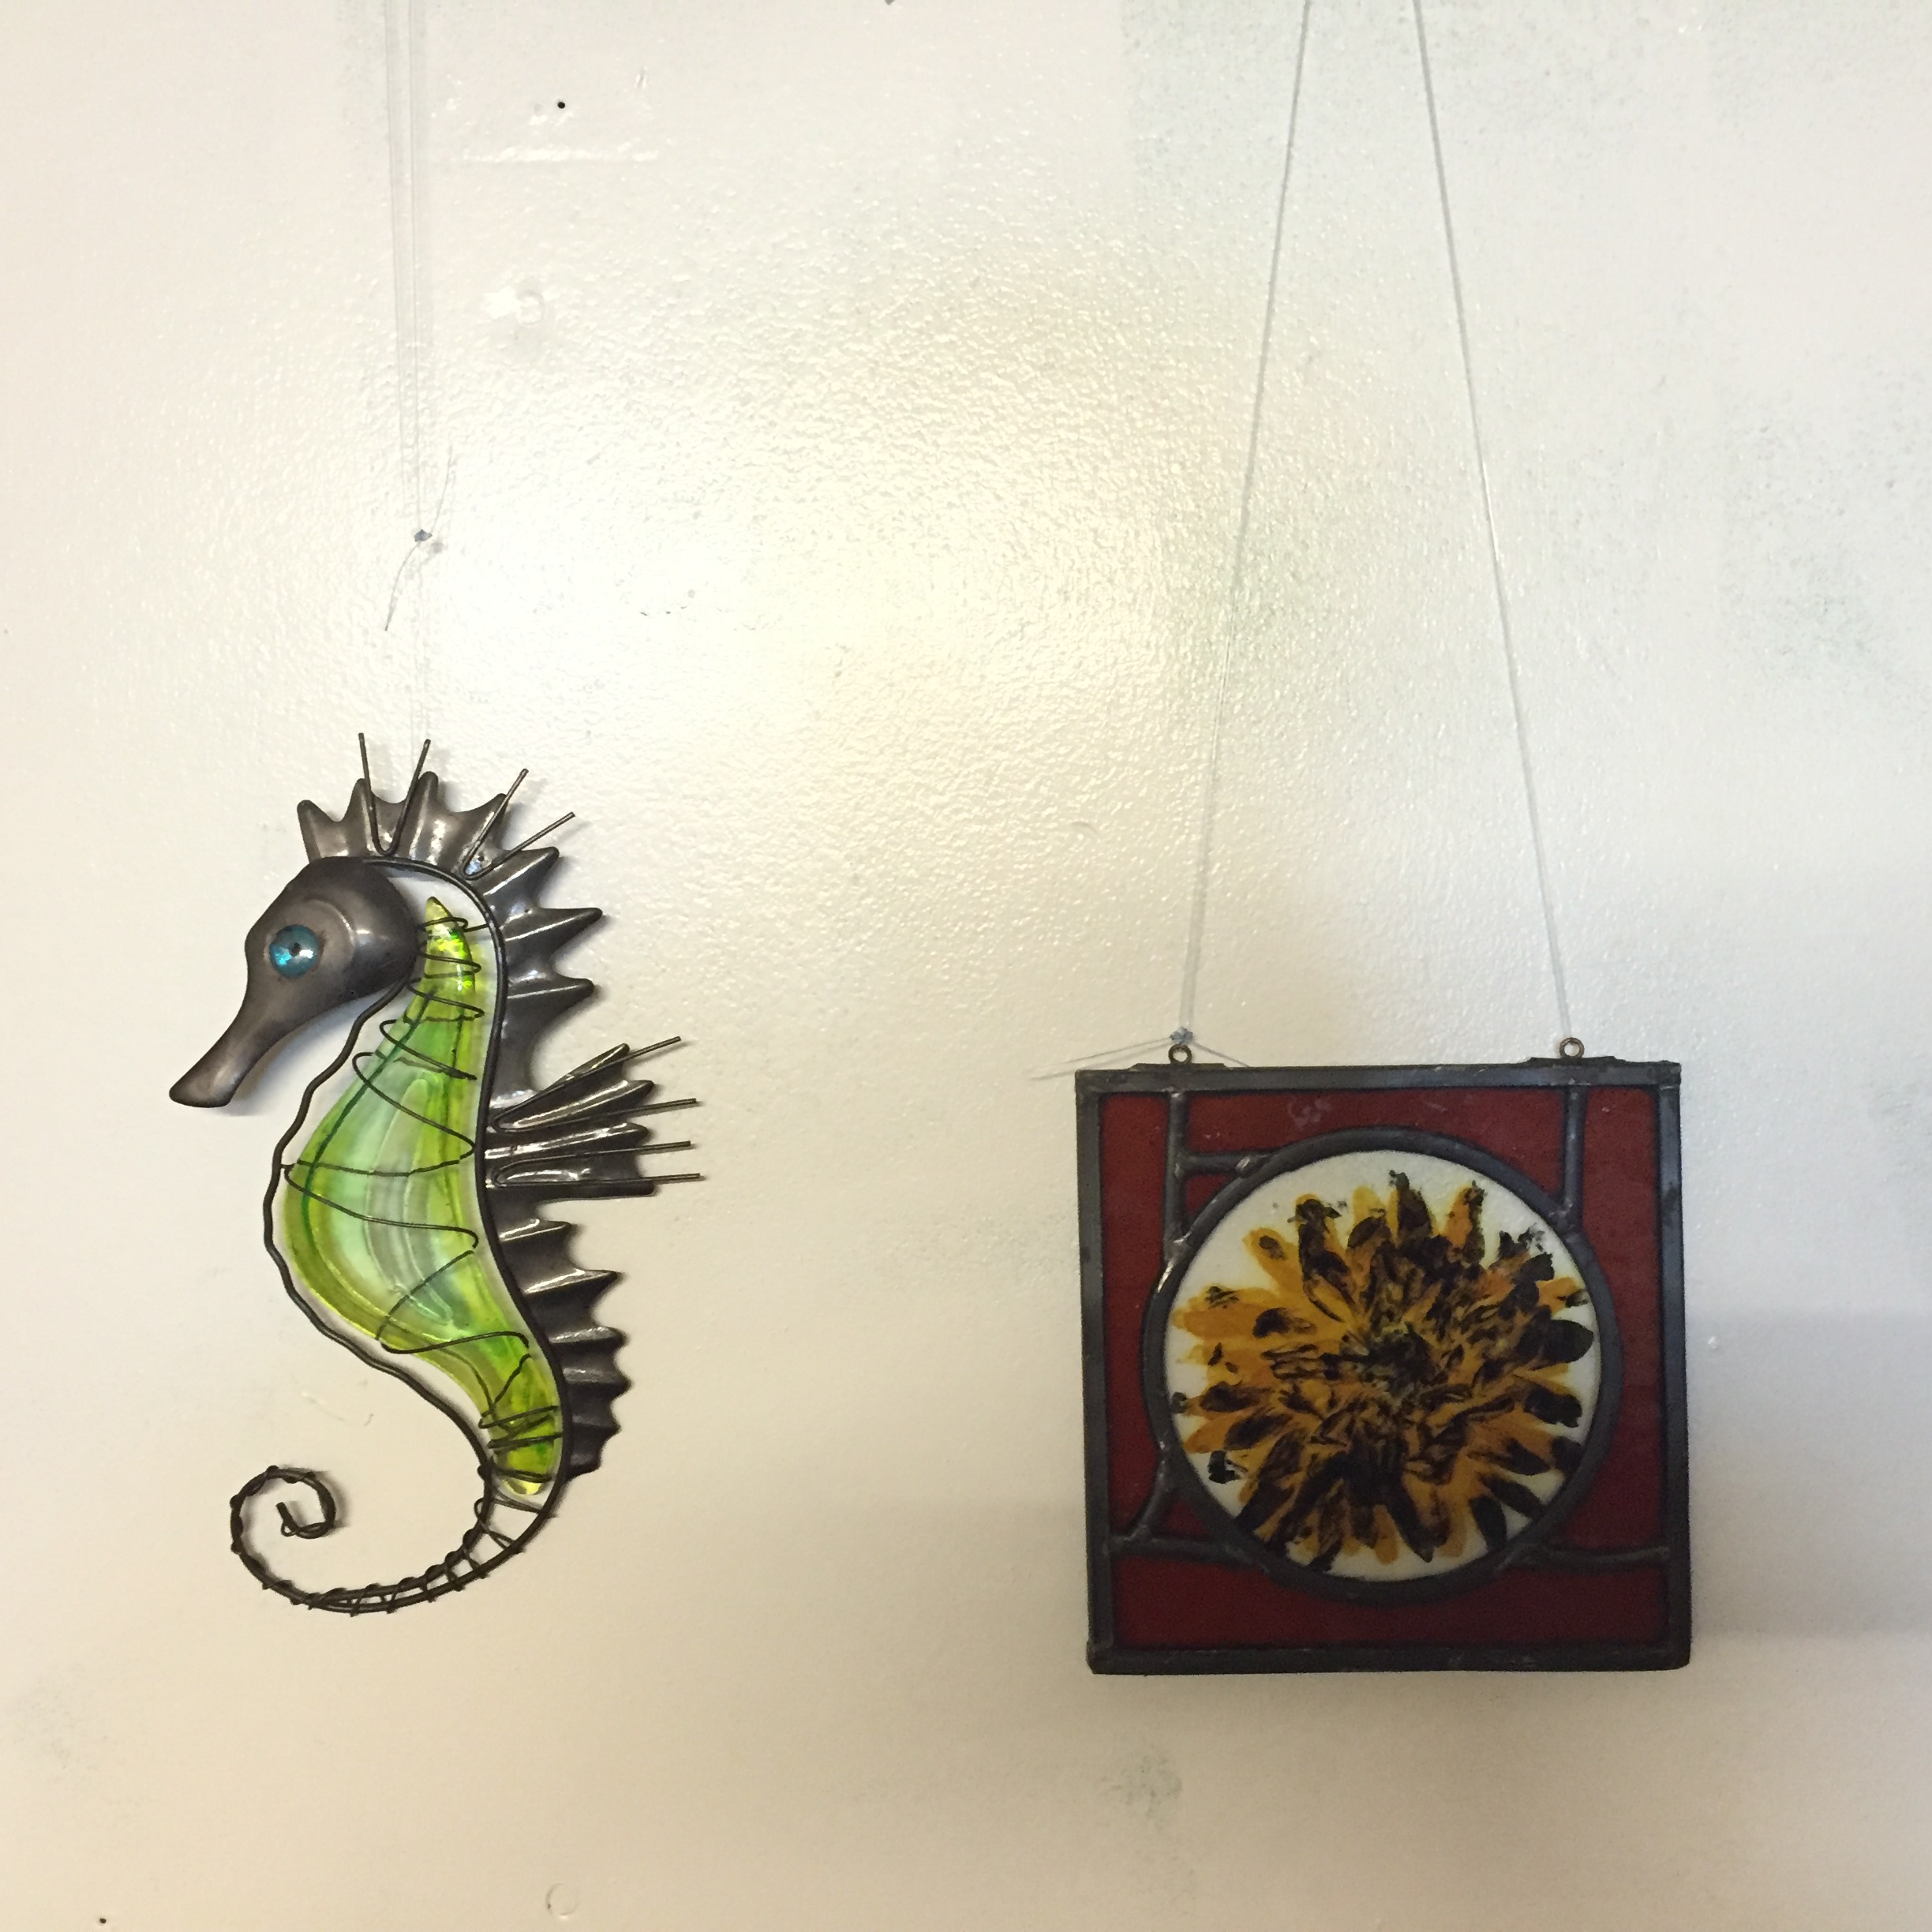 A stained glass sea horse and decorative plaque.